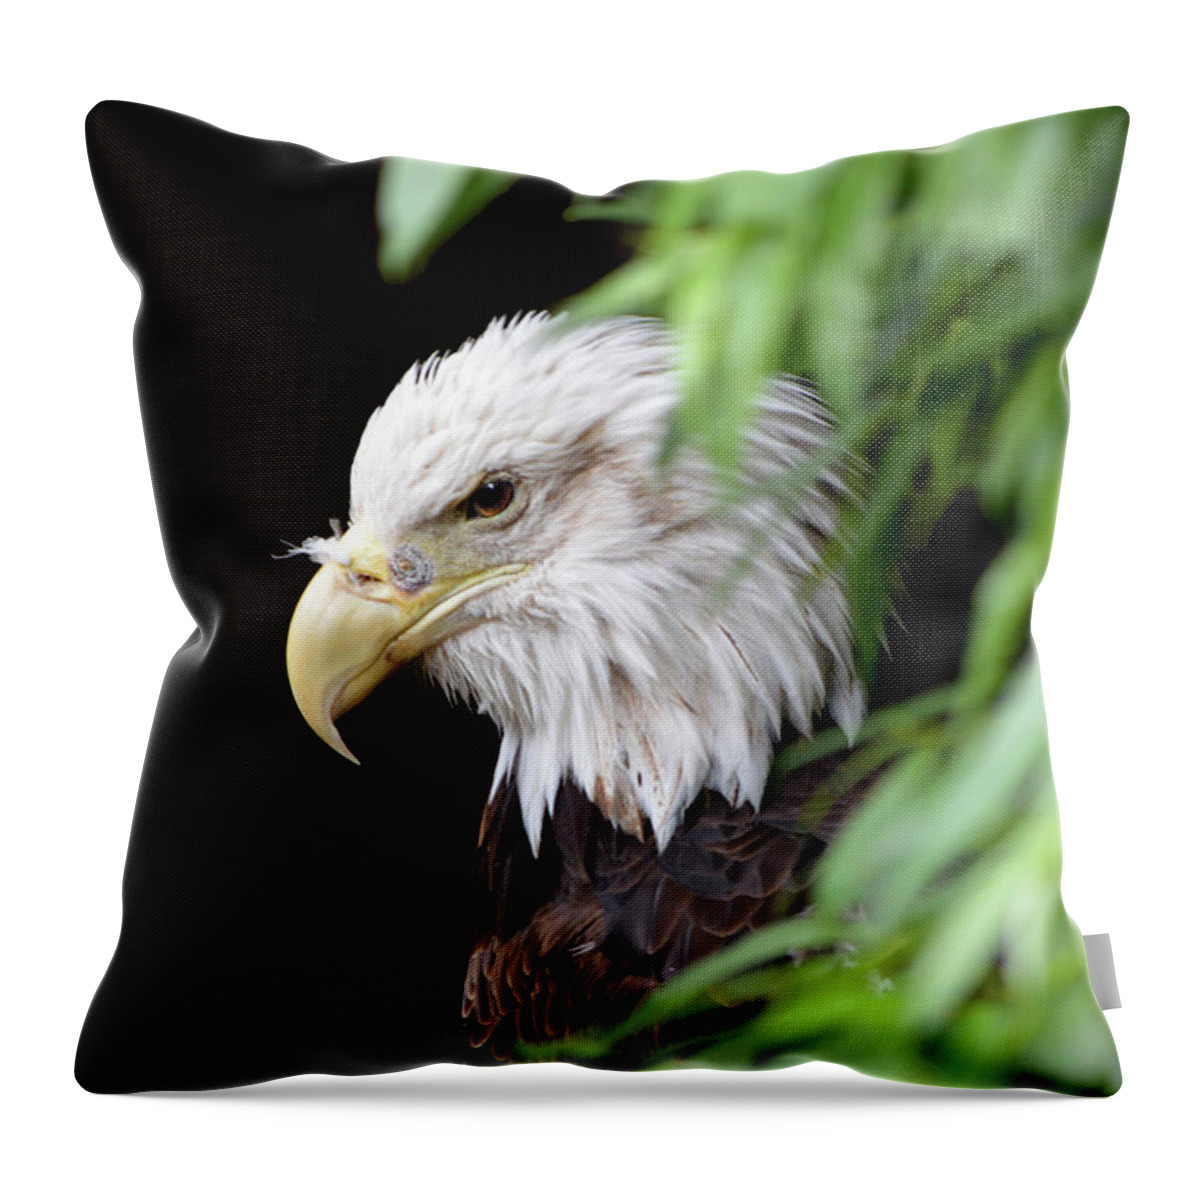 Eagle Throw Pillow featuring the photograph Eagle 2 by Deborah M